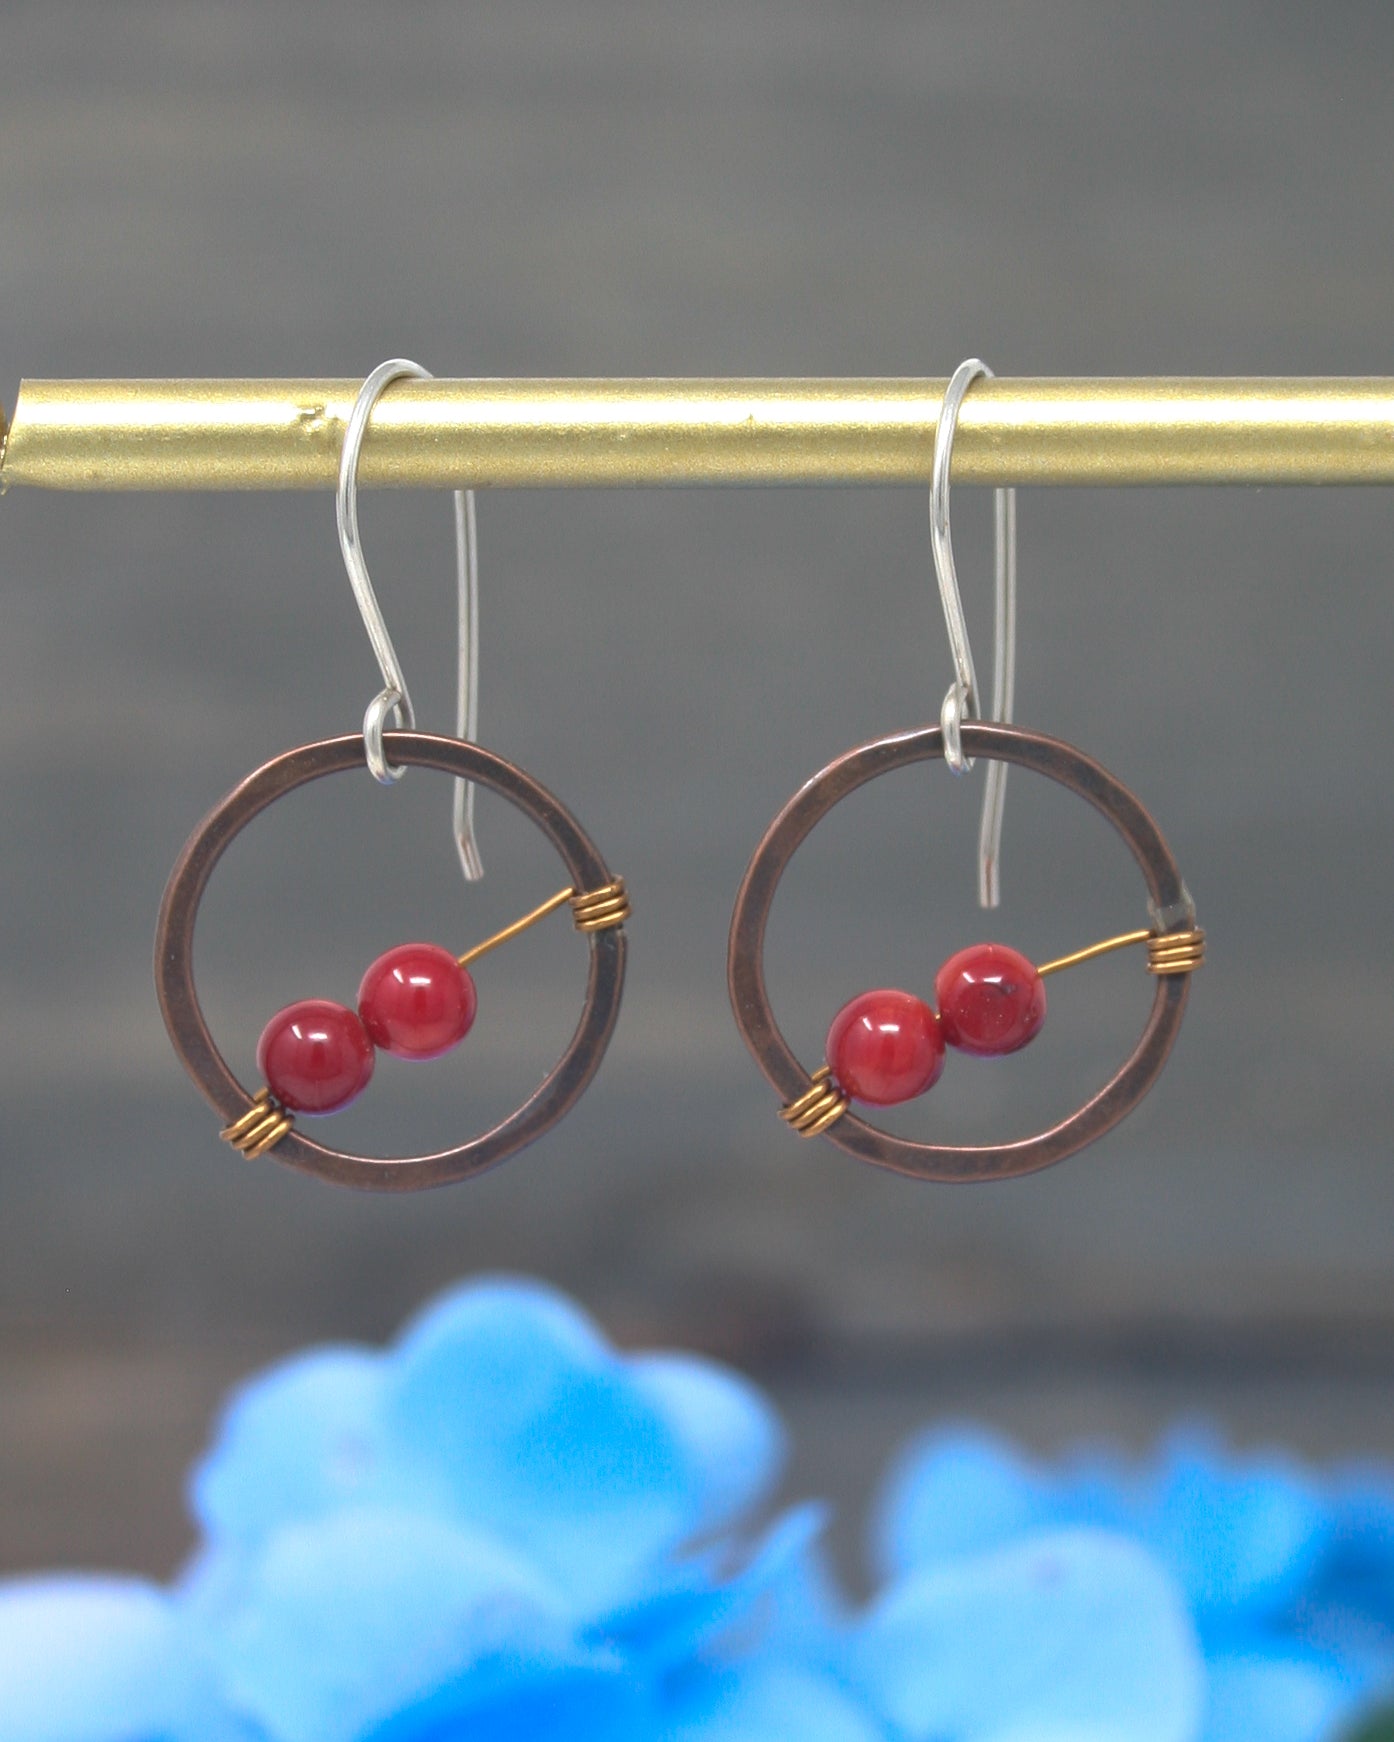 a pair of earrings hanging from a hook